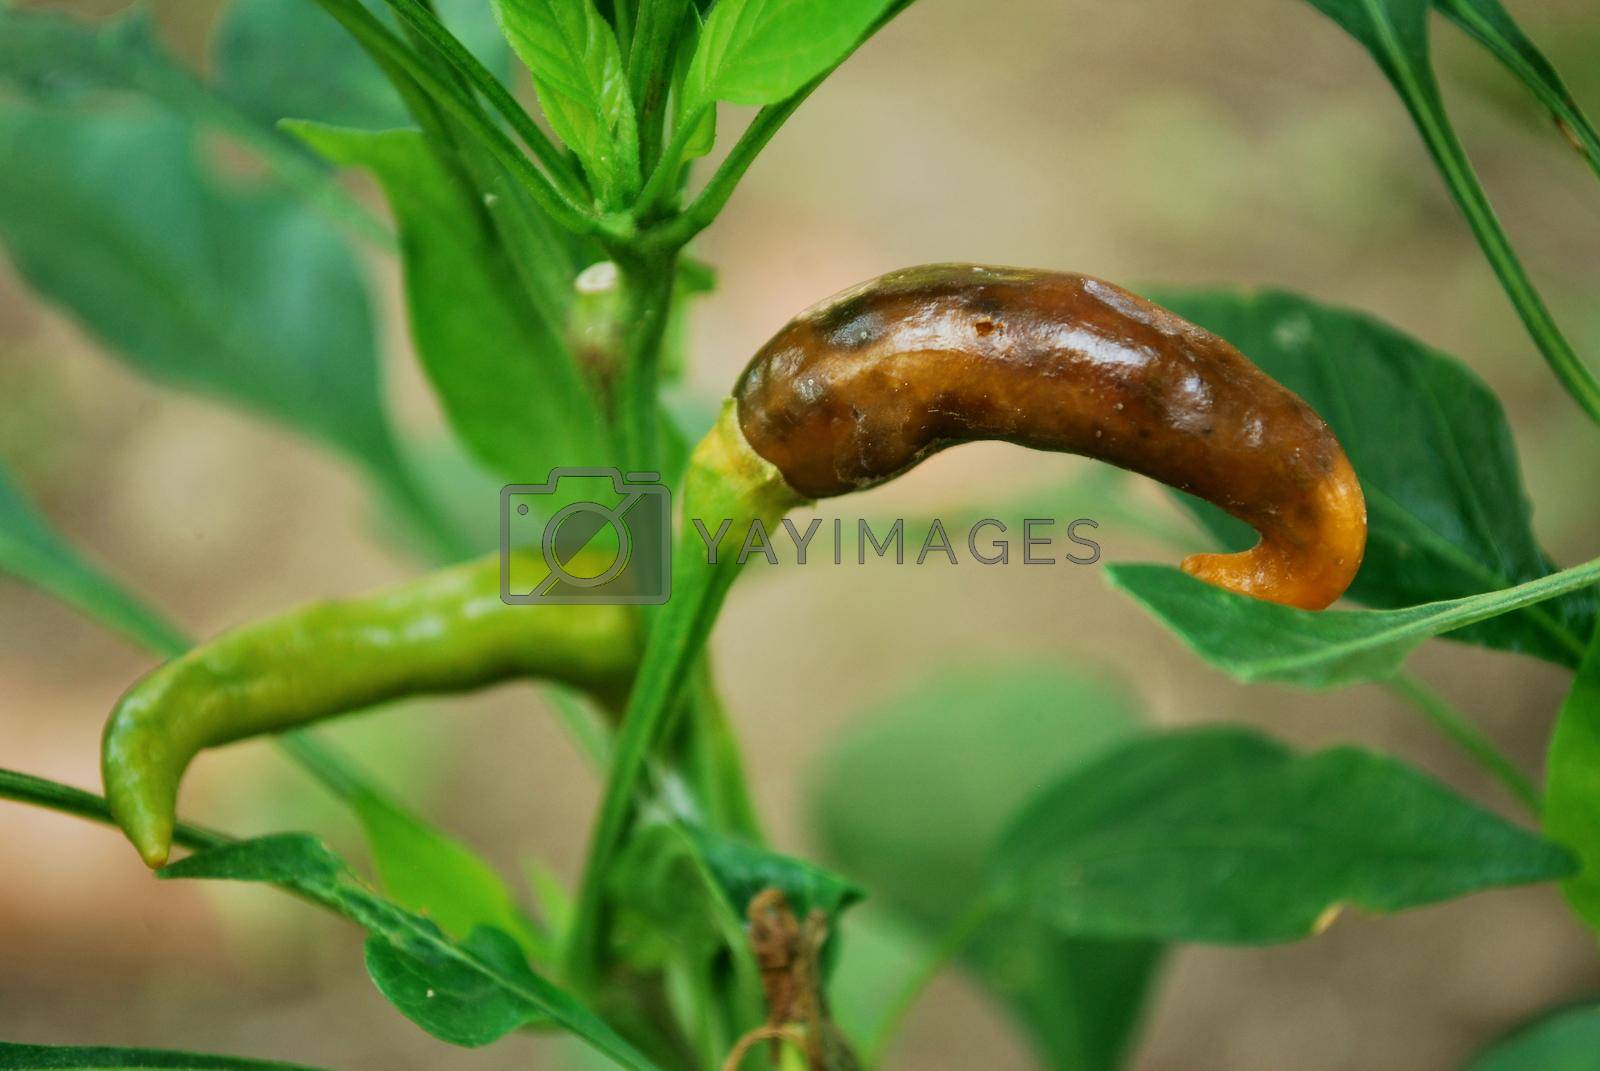 Royalty free image of Chili rot caused by borer destruction.Chili caused by insects. by thitimontoyai